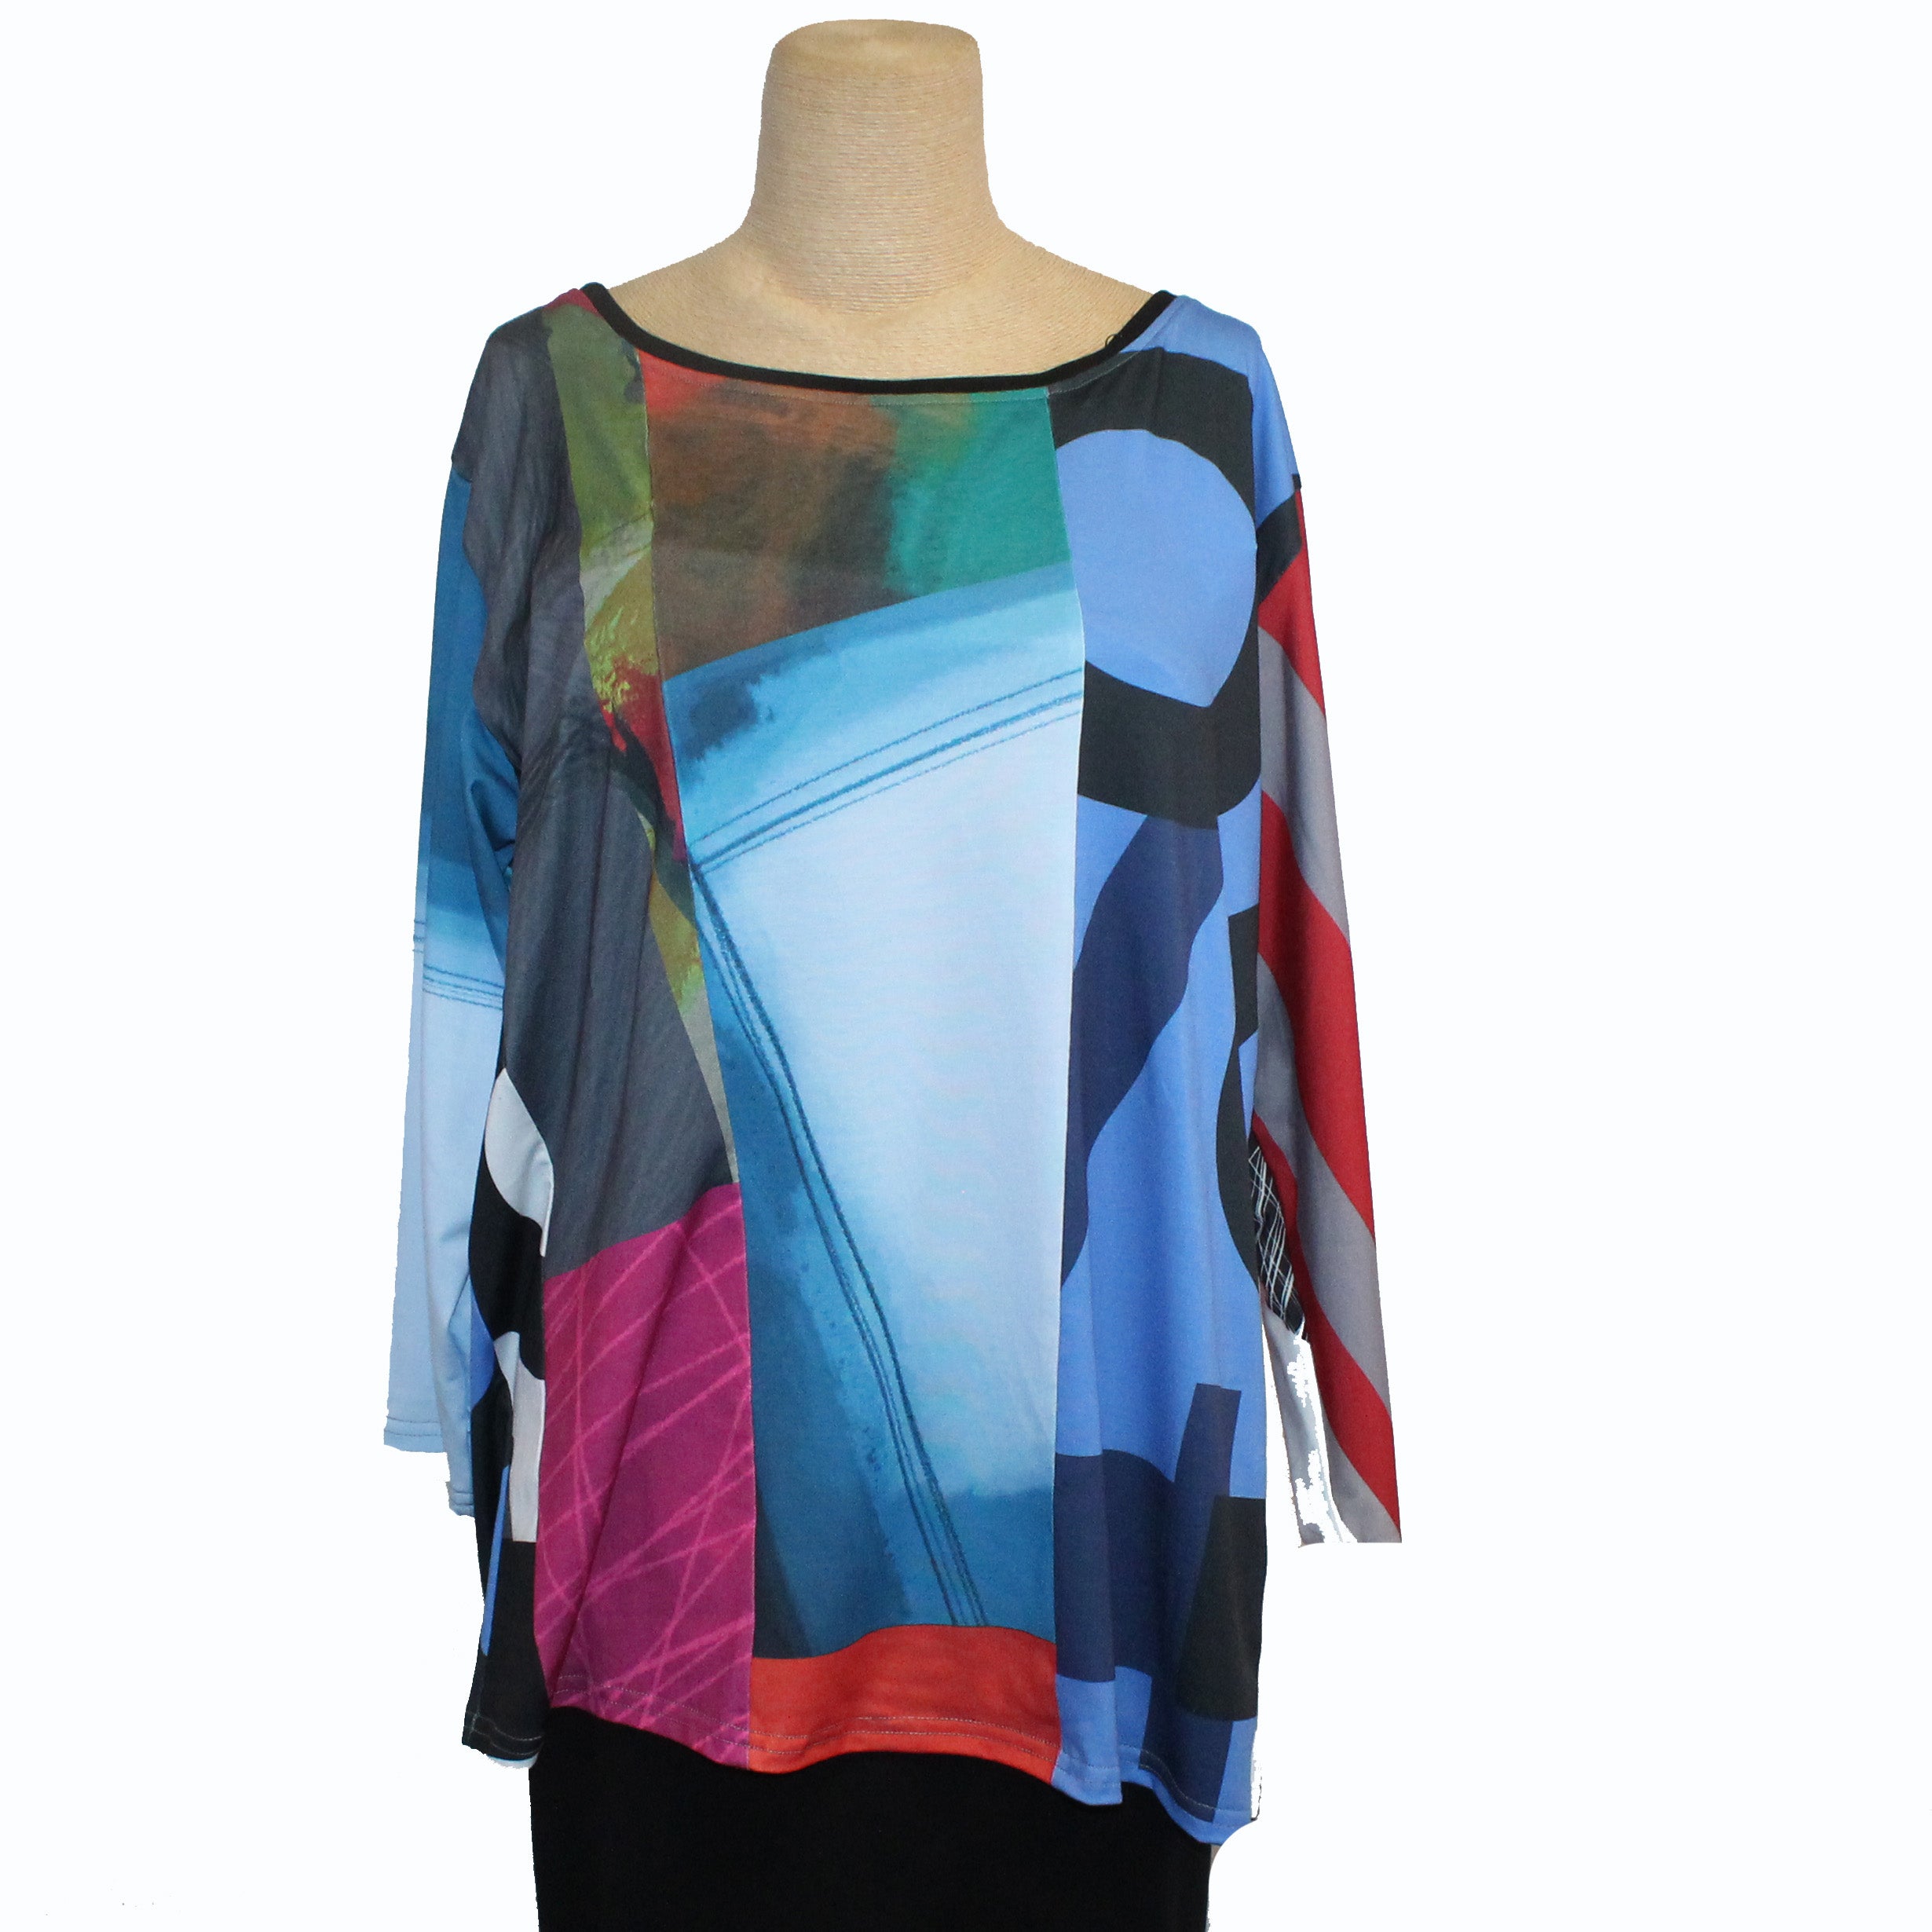 Andrea Geer Boxy Pullover, 3/4 Sleeve, Brights 8, L